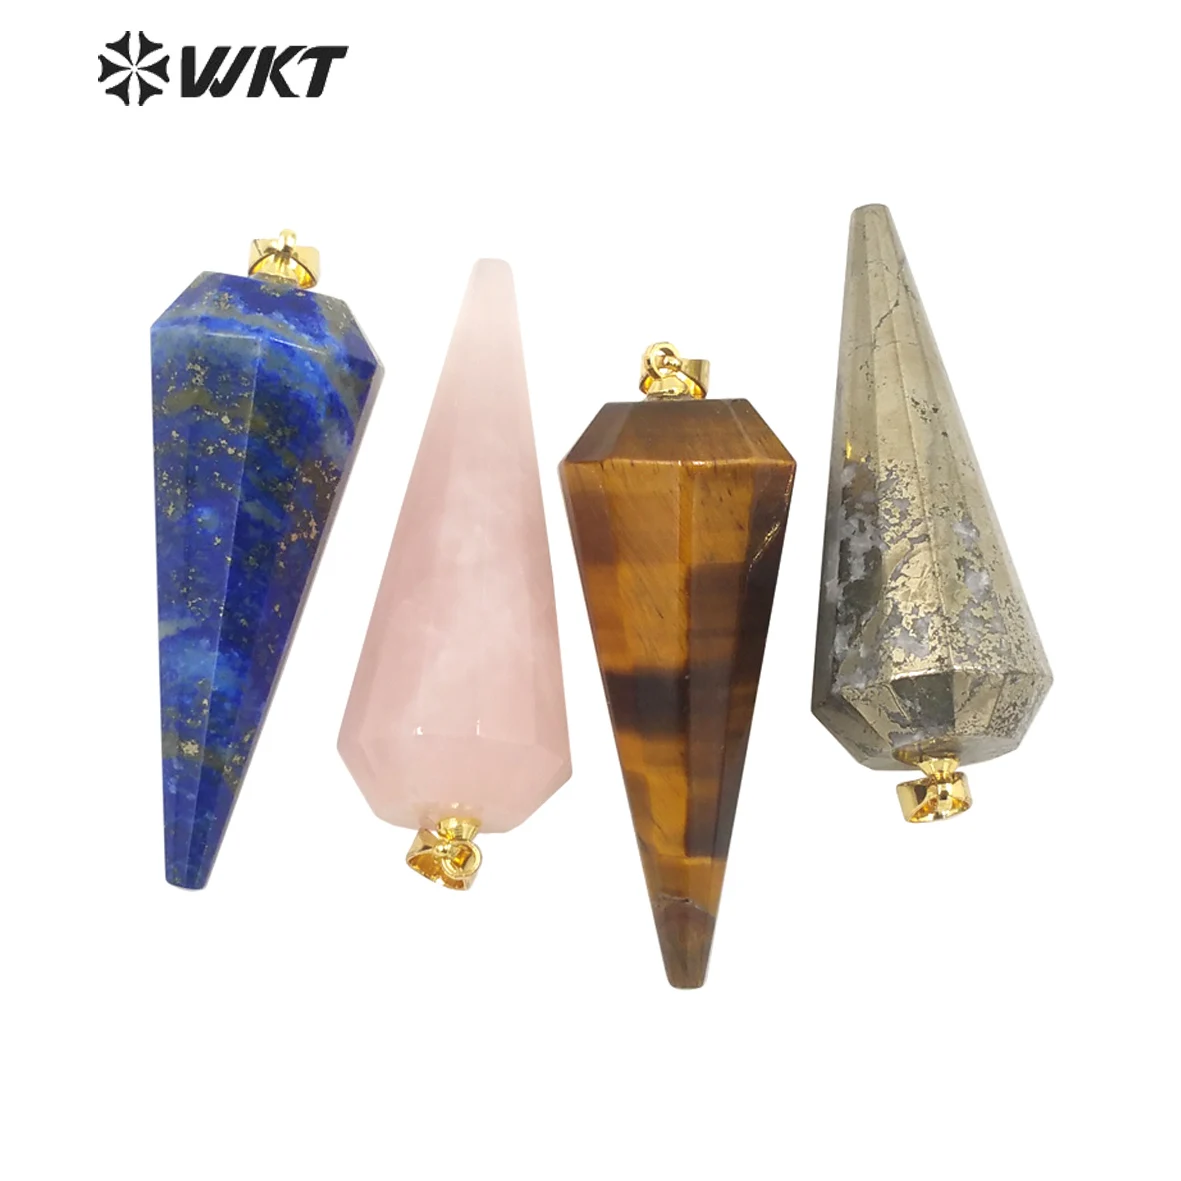 

WT-P1803 WKT 2022 Beautiful Style Cone Shape Natural Gemstones Women Gift Pendant For Wedding Party Trend Jewelry Nice